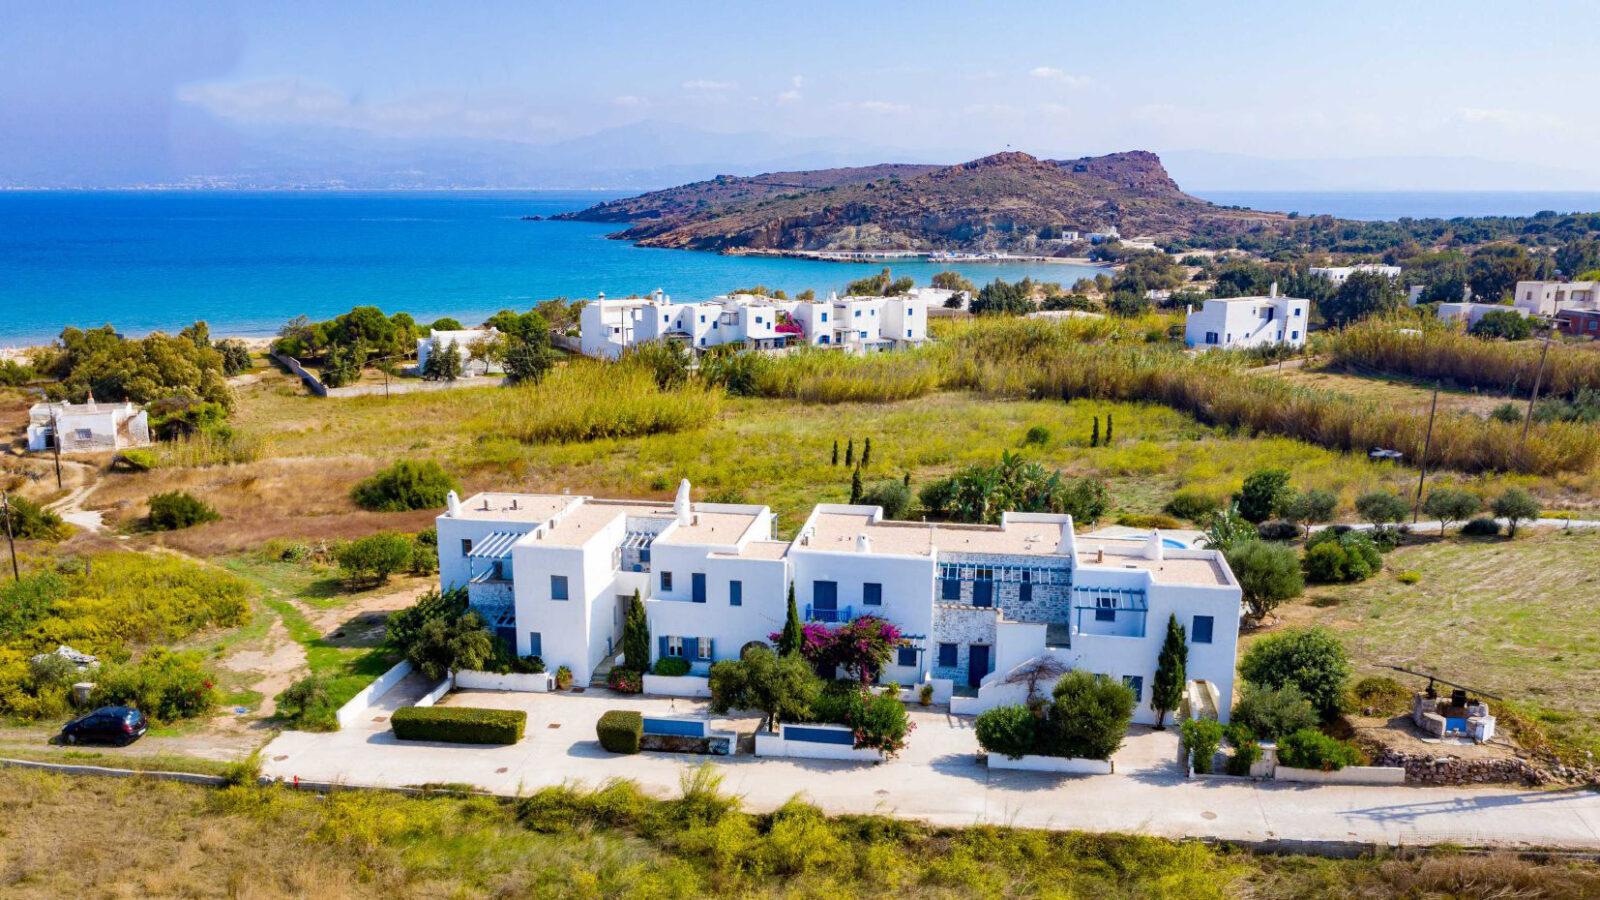 *SOLD* APARTMENTS FOR SALE IN MOLOS, PAROS, GREECE *SOLD*